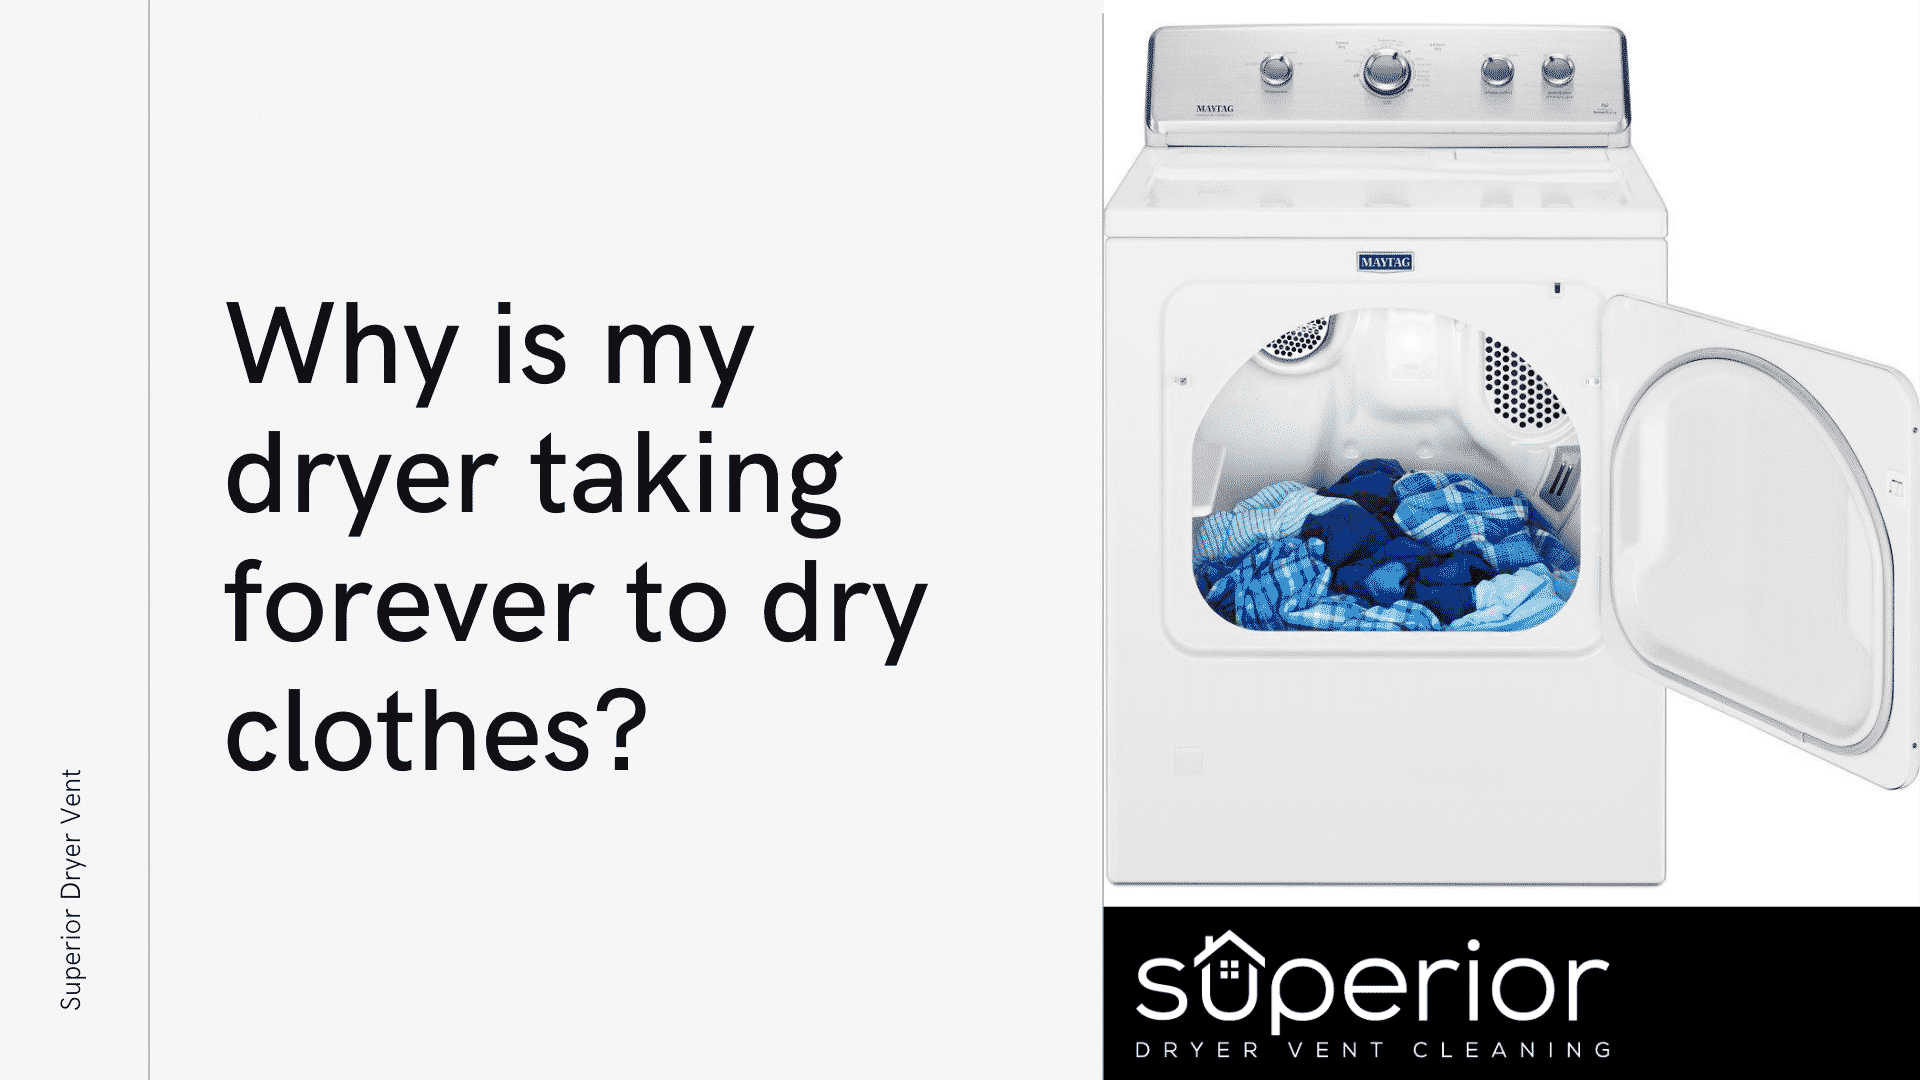 Why Is My Dryer Taking Forever to Dry Clothes?